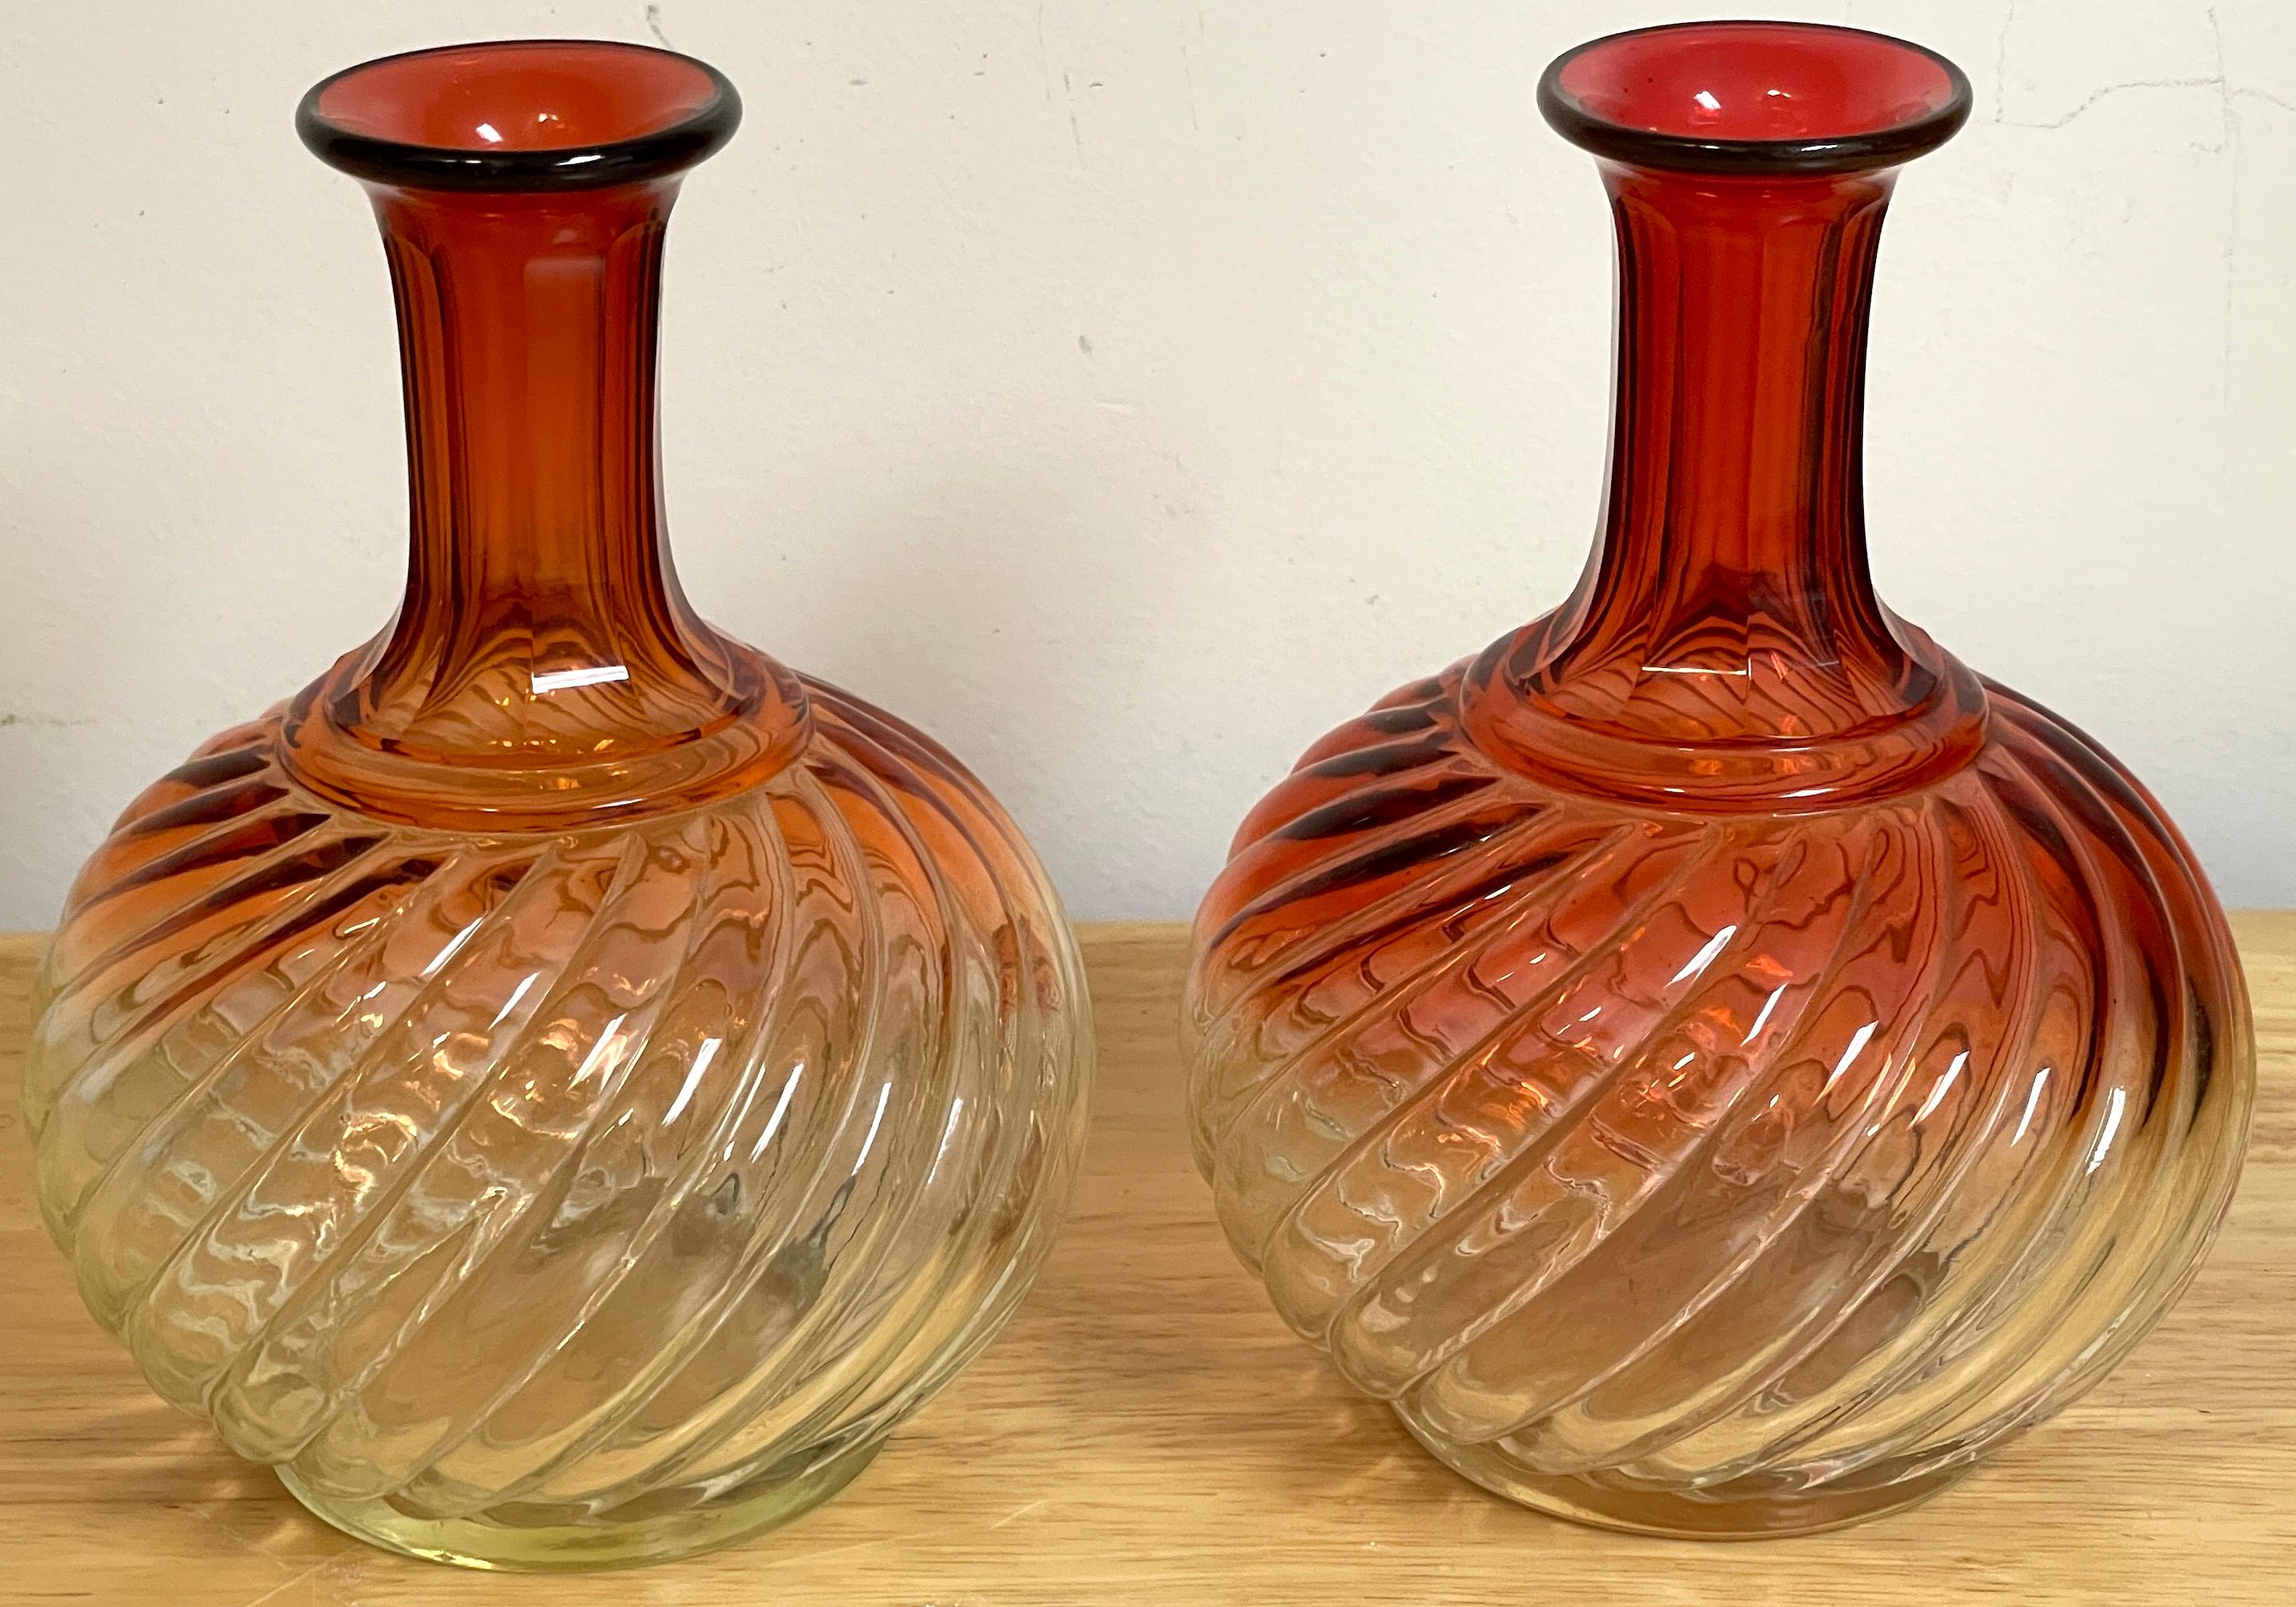 Pair of Baccarat Amberina Diminutive Claret Jugs, Each one with typical swirl design, with panel cut necks, polished bottom, unmarked. 
Each one measures 7.5